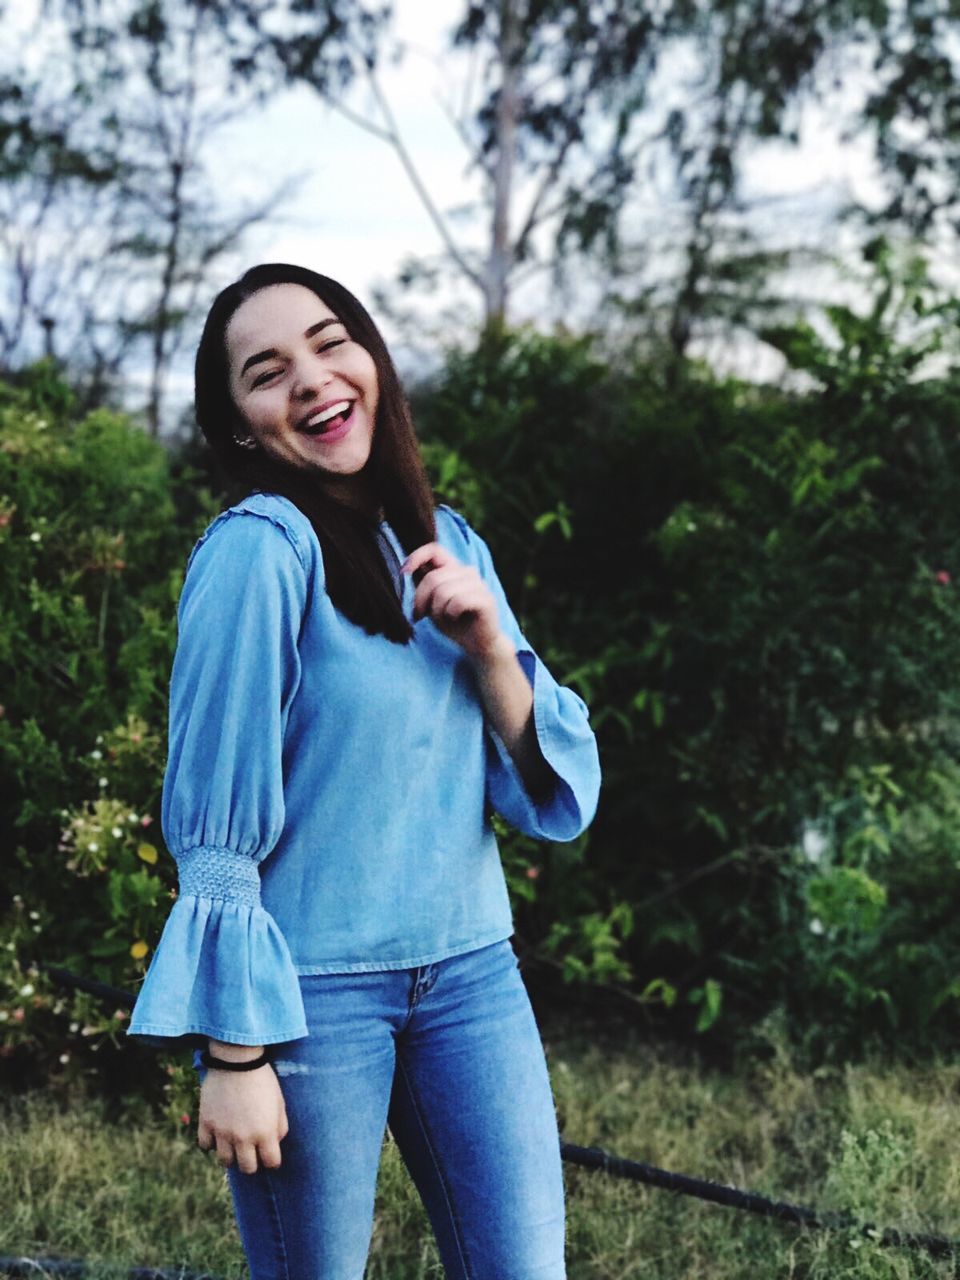 portrait, smiling, casual clothing, one person, jeans, one woman only, looking at camera, beauty, young adult, outdoors, one young woman only, leisure activity, only women, recreational pursuit, people, lifestyles, adult, adults only, standing, happiness, nature, cheerful, young women, women, beautiful woman, tree, day